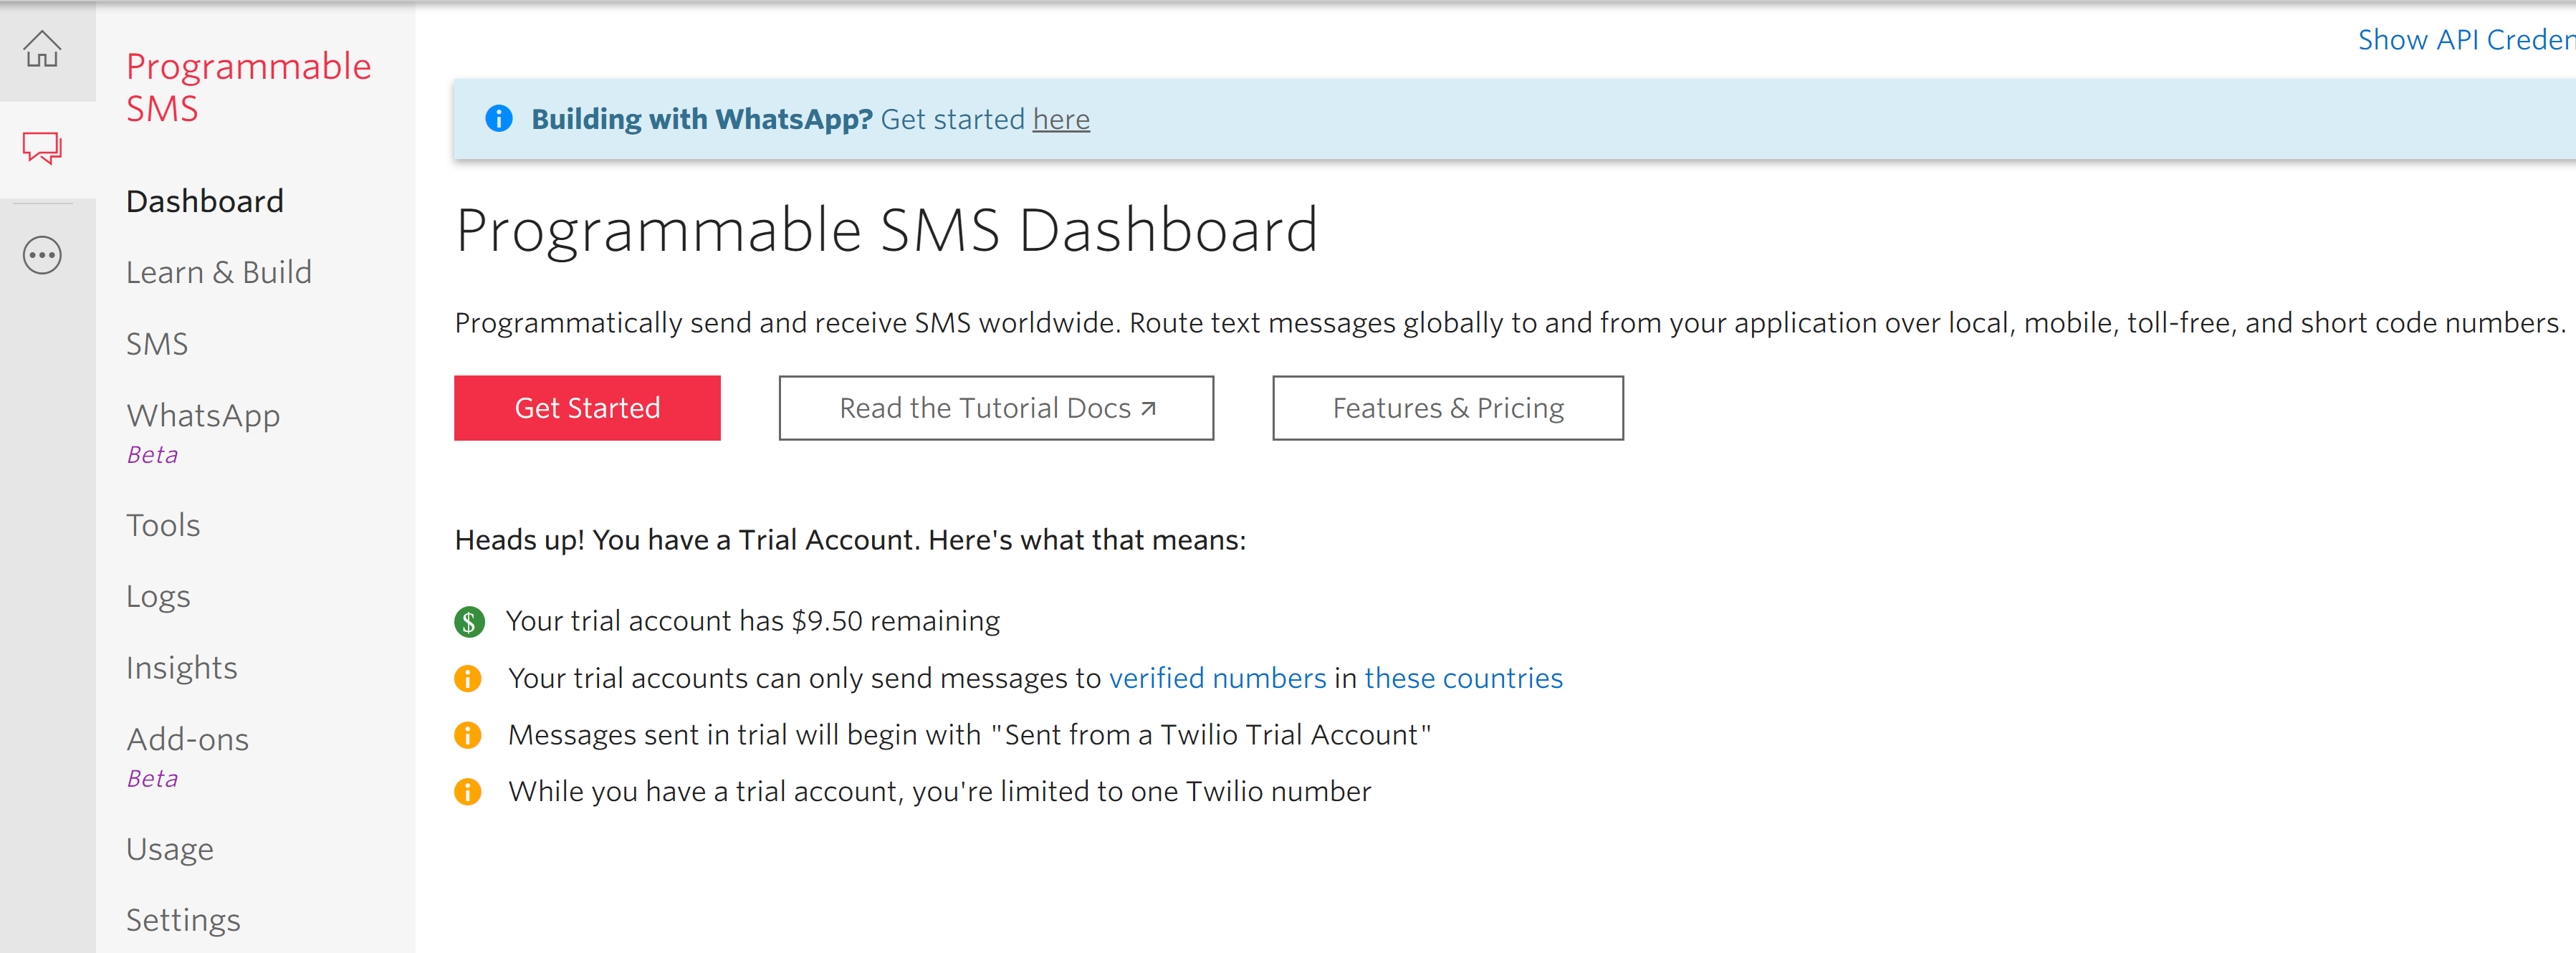 SMS Dashboard.PNG